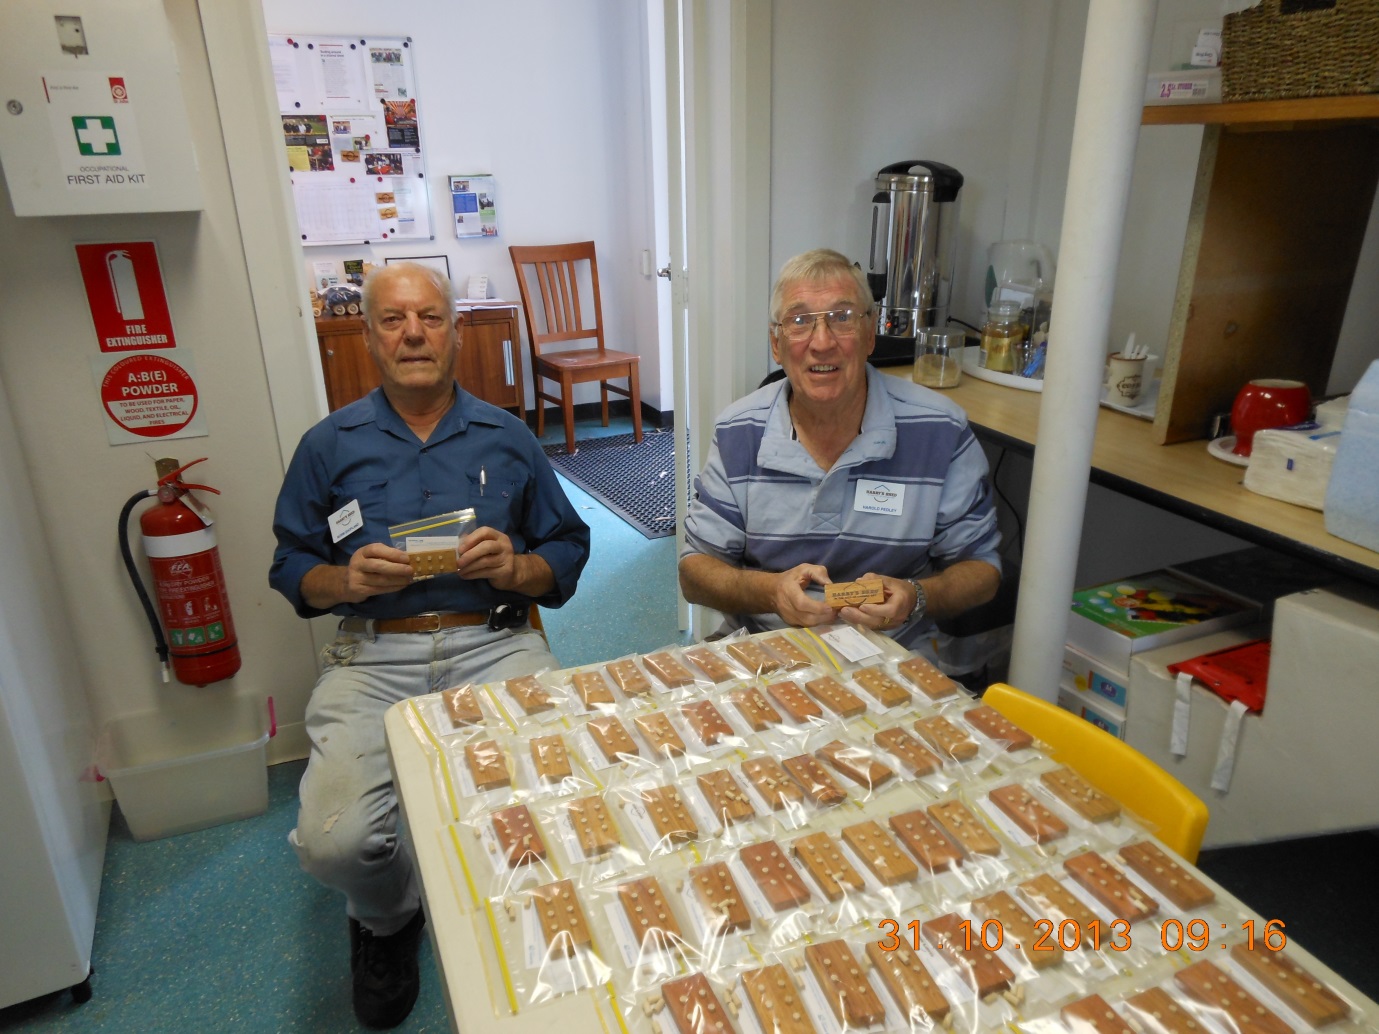 Norm Shopland and Harold Pedley from Harry's Shed with the braille boards